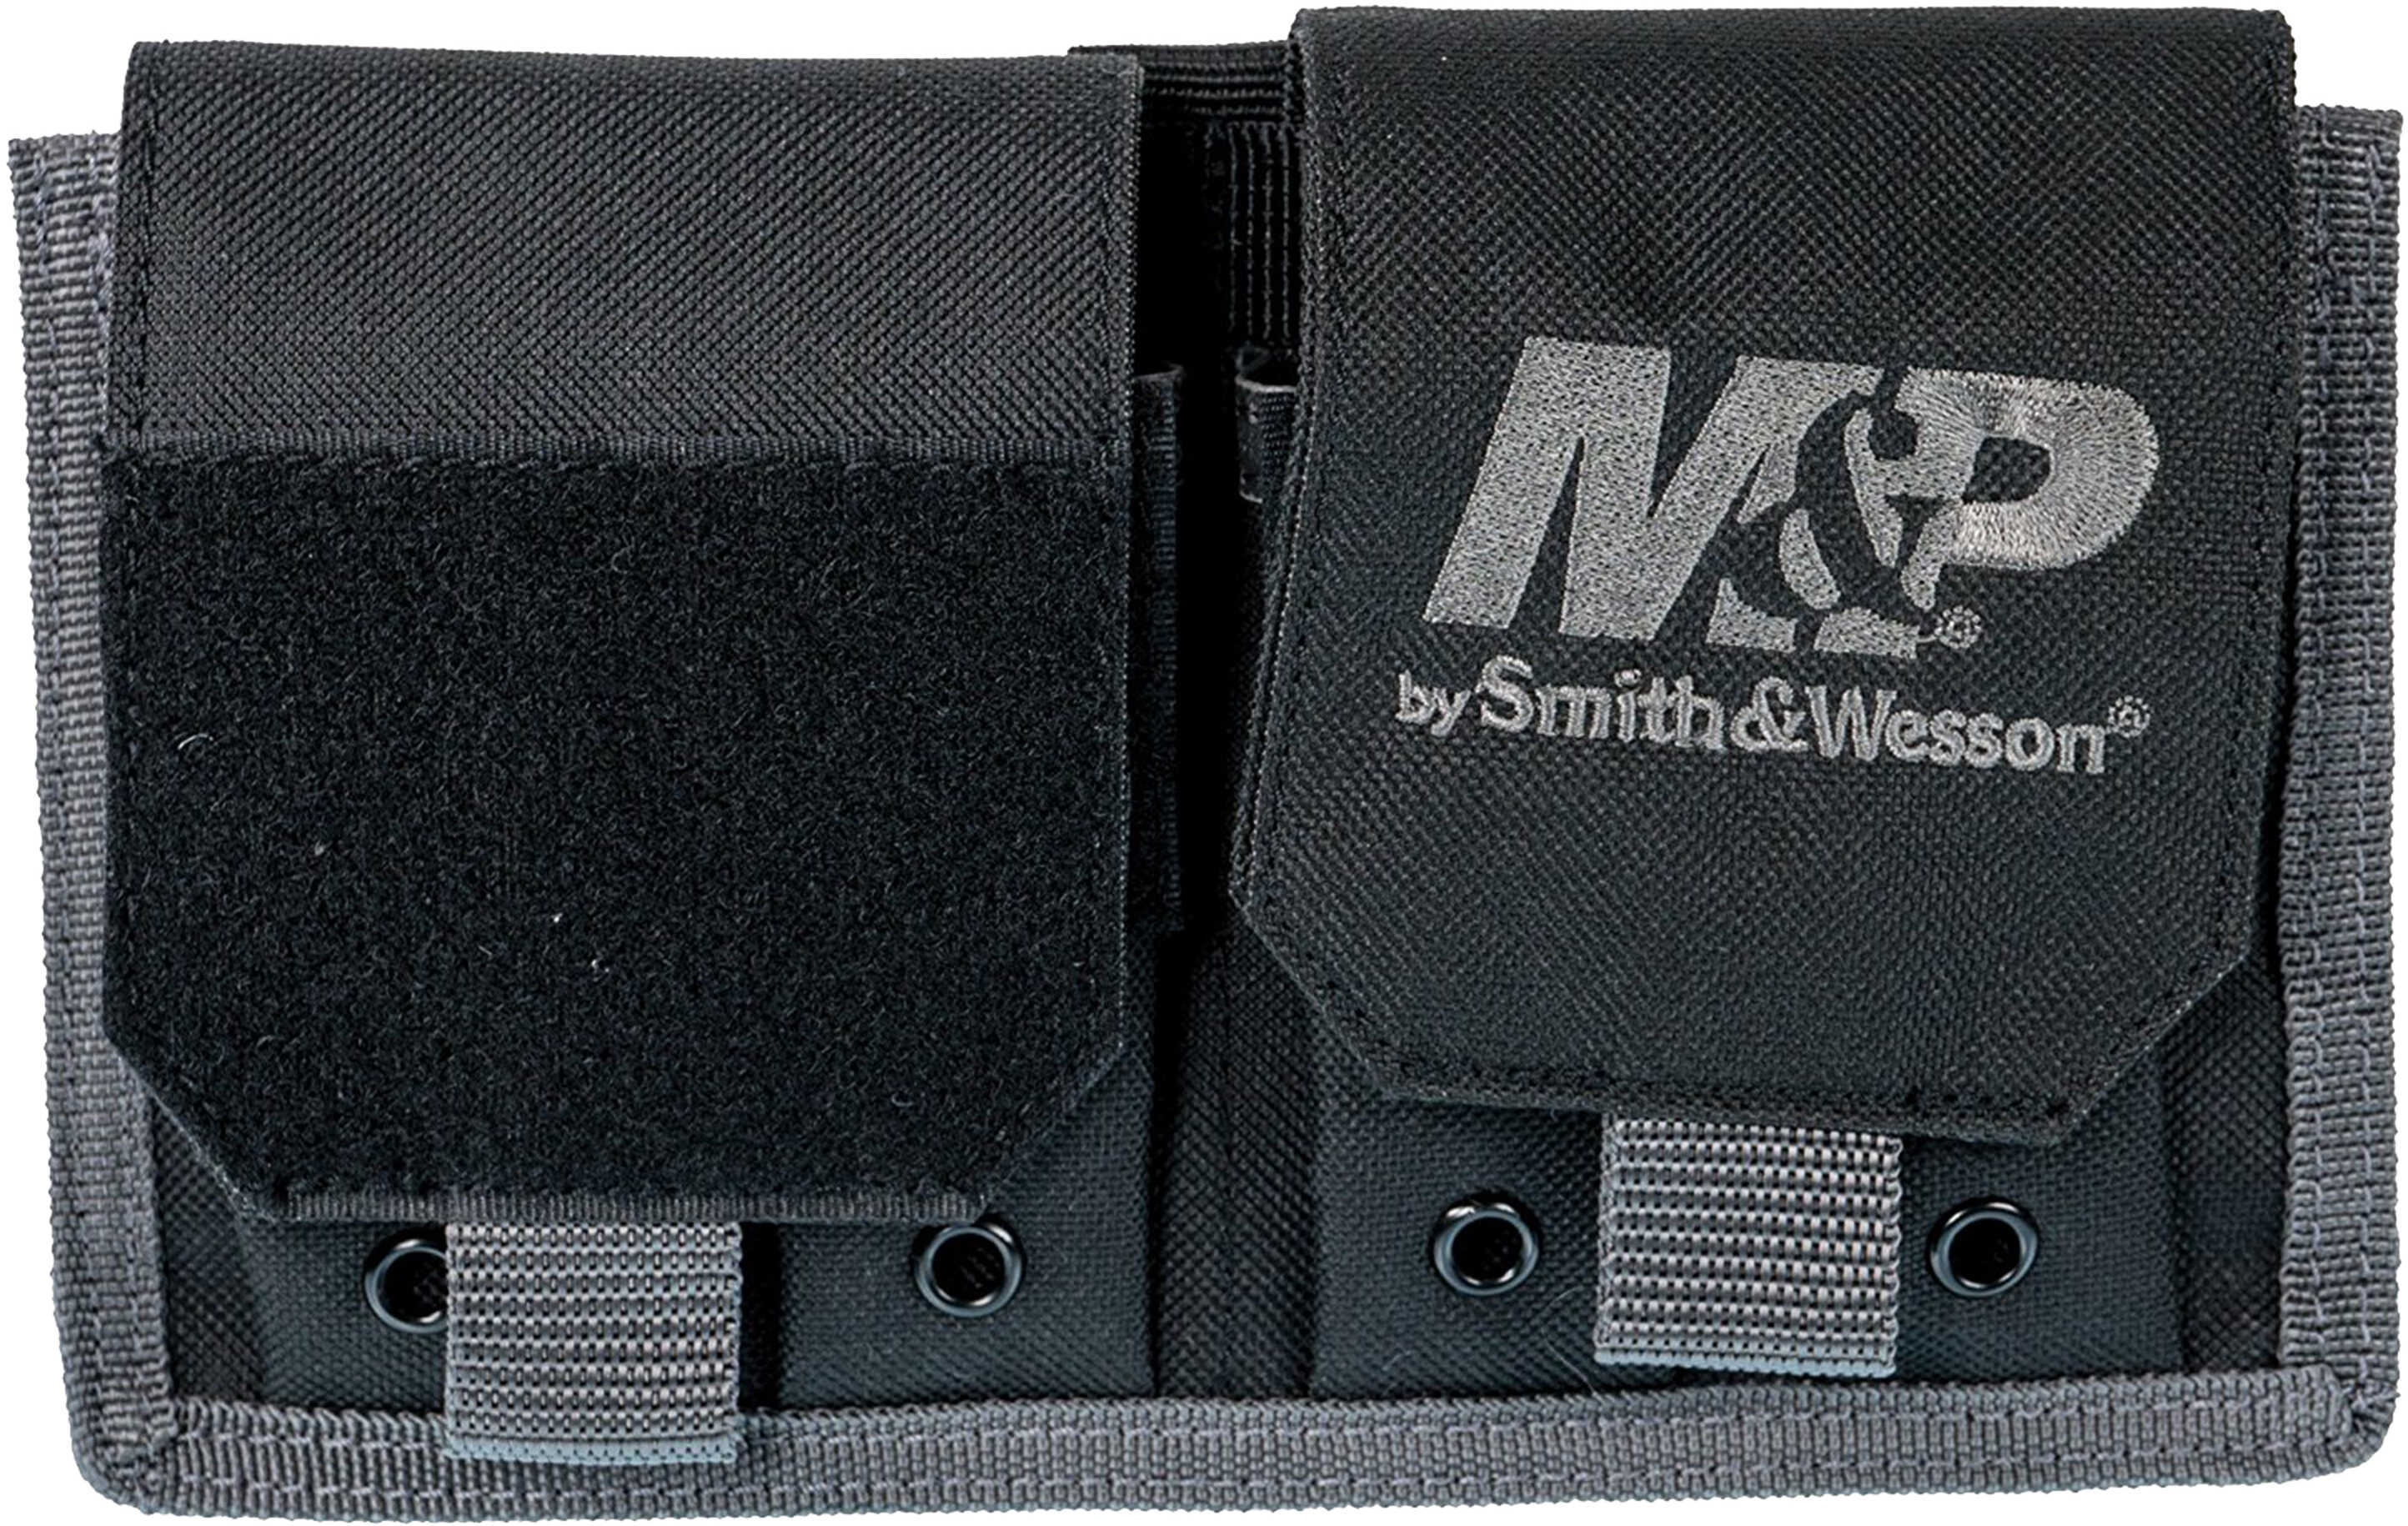 Smith & Wesson Accessories Magazine Pouch Pro Tac 4 Pistol Md: 110178